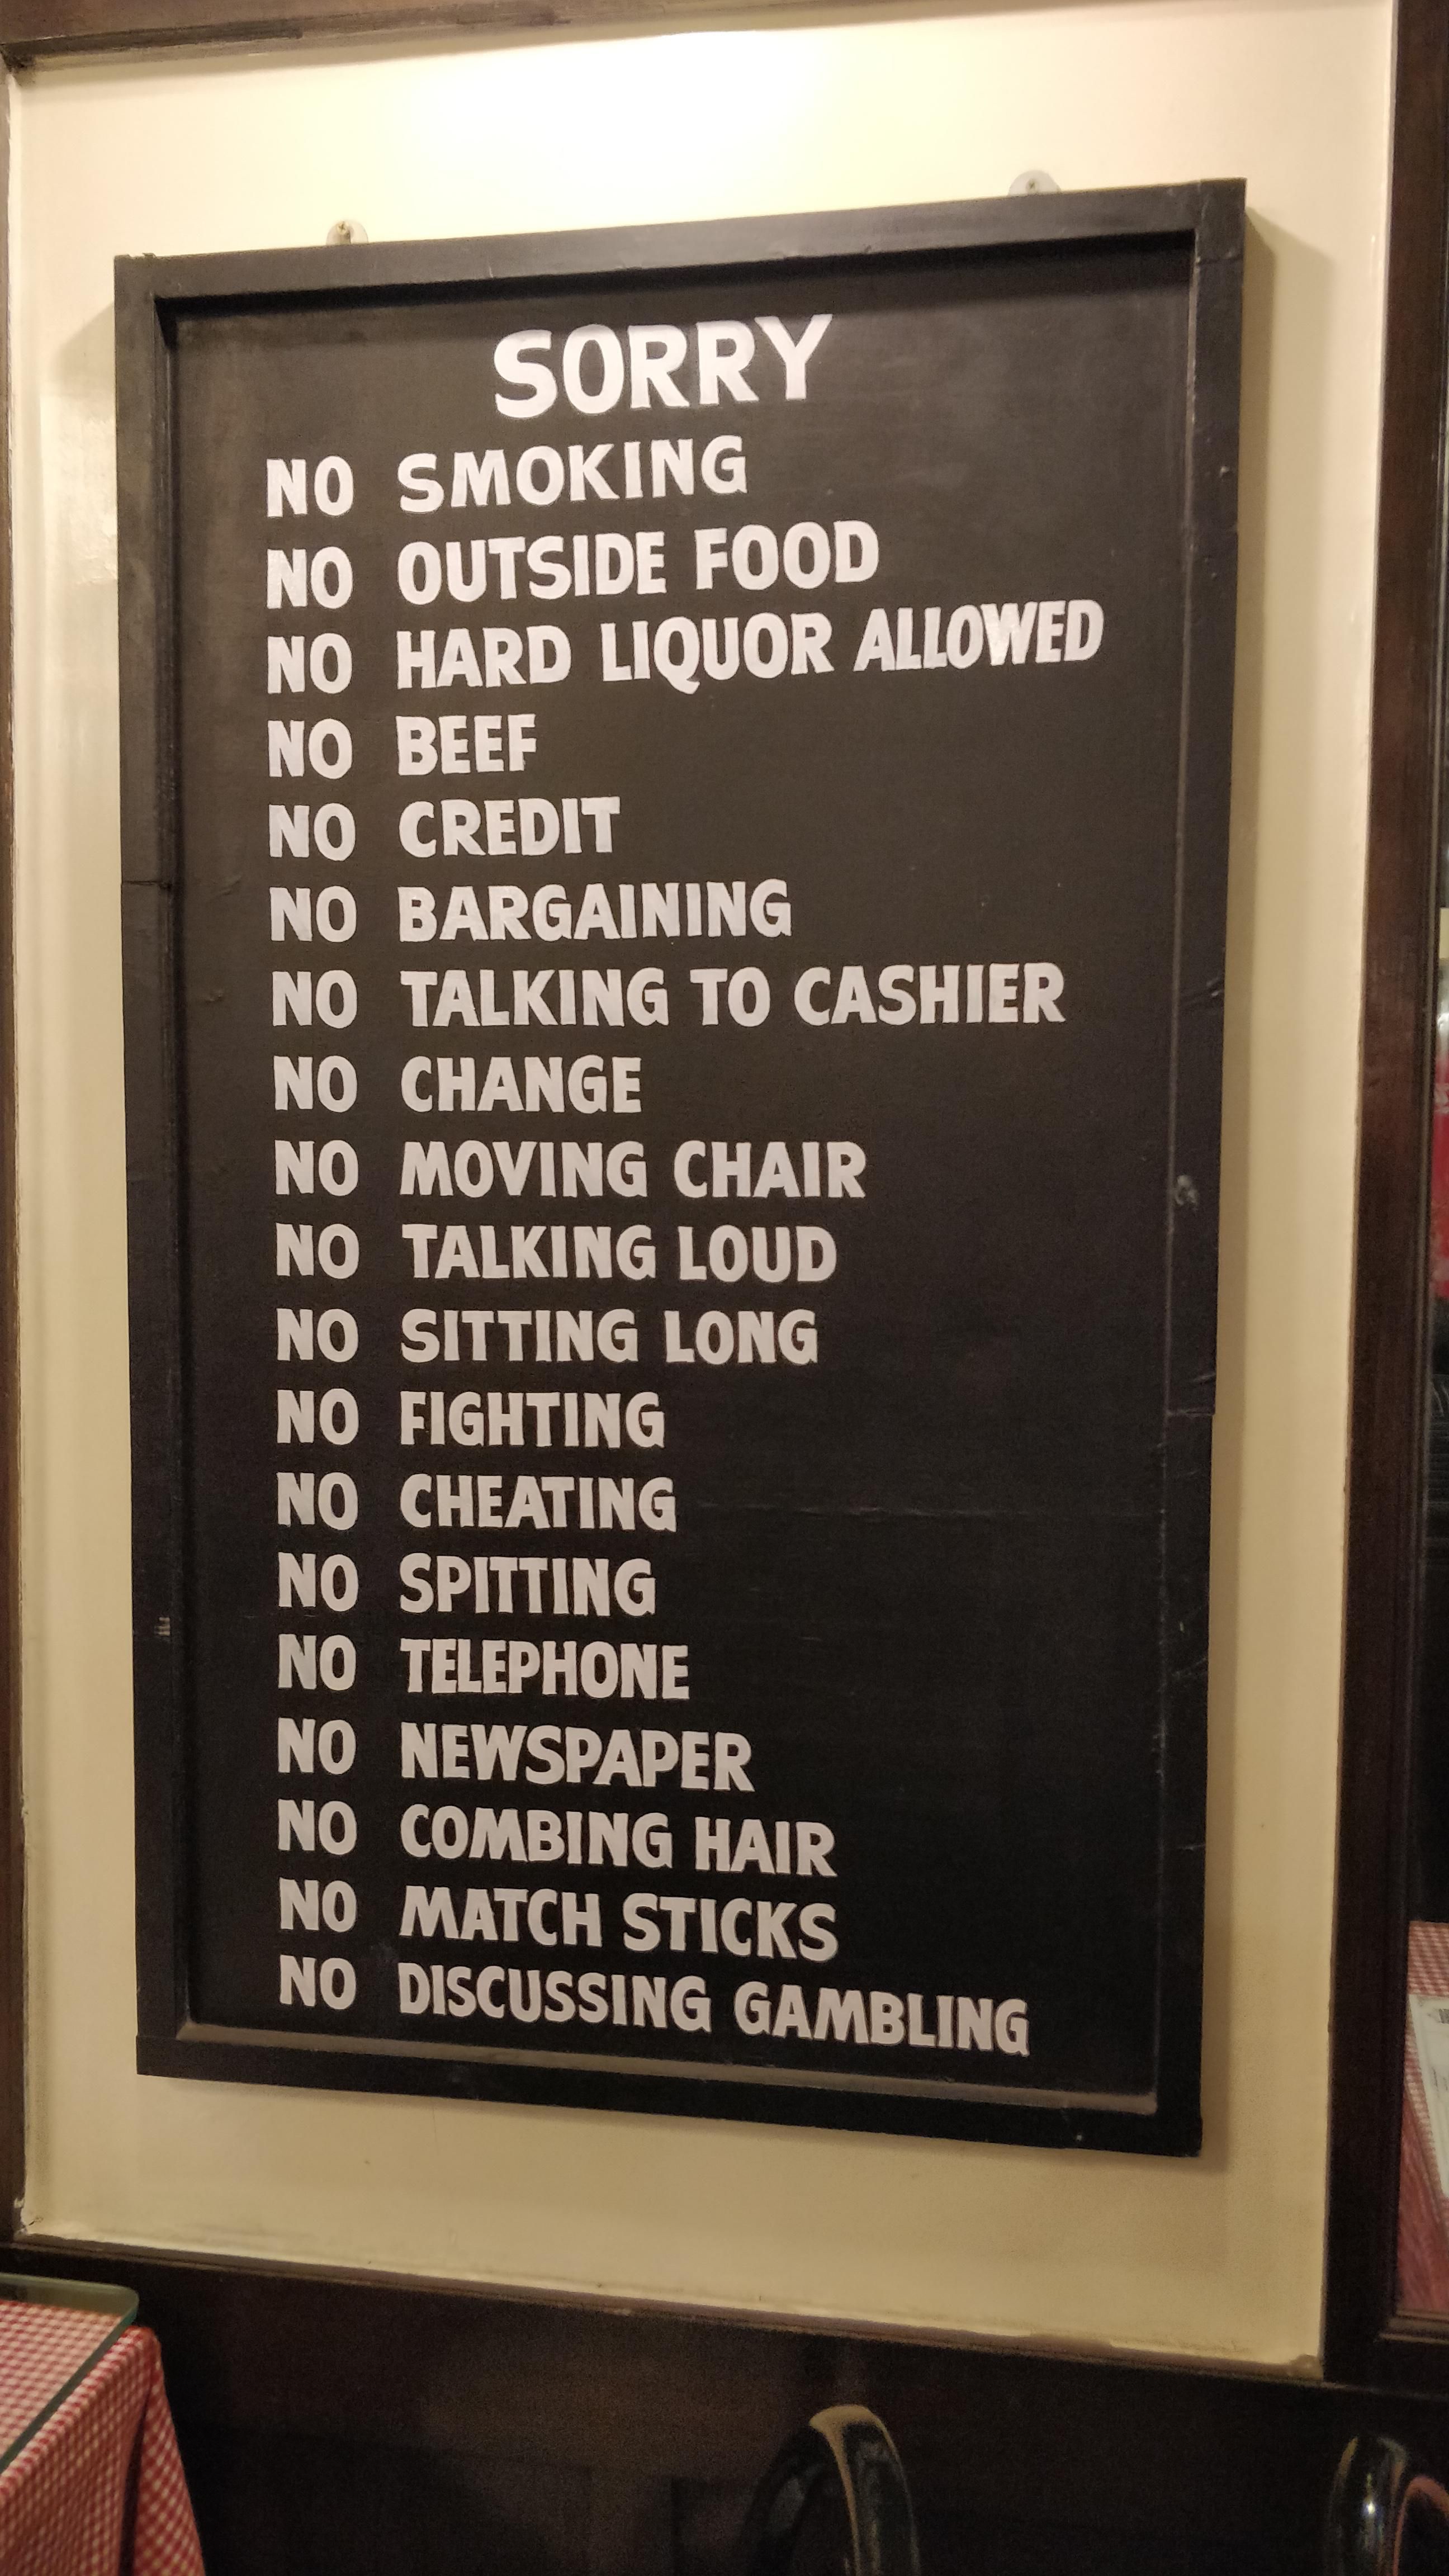 This list of rules at a café